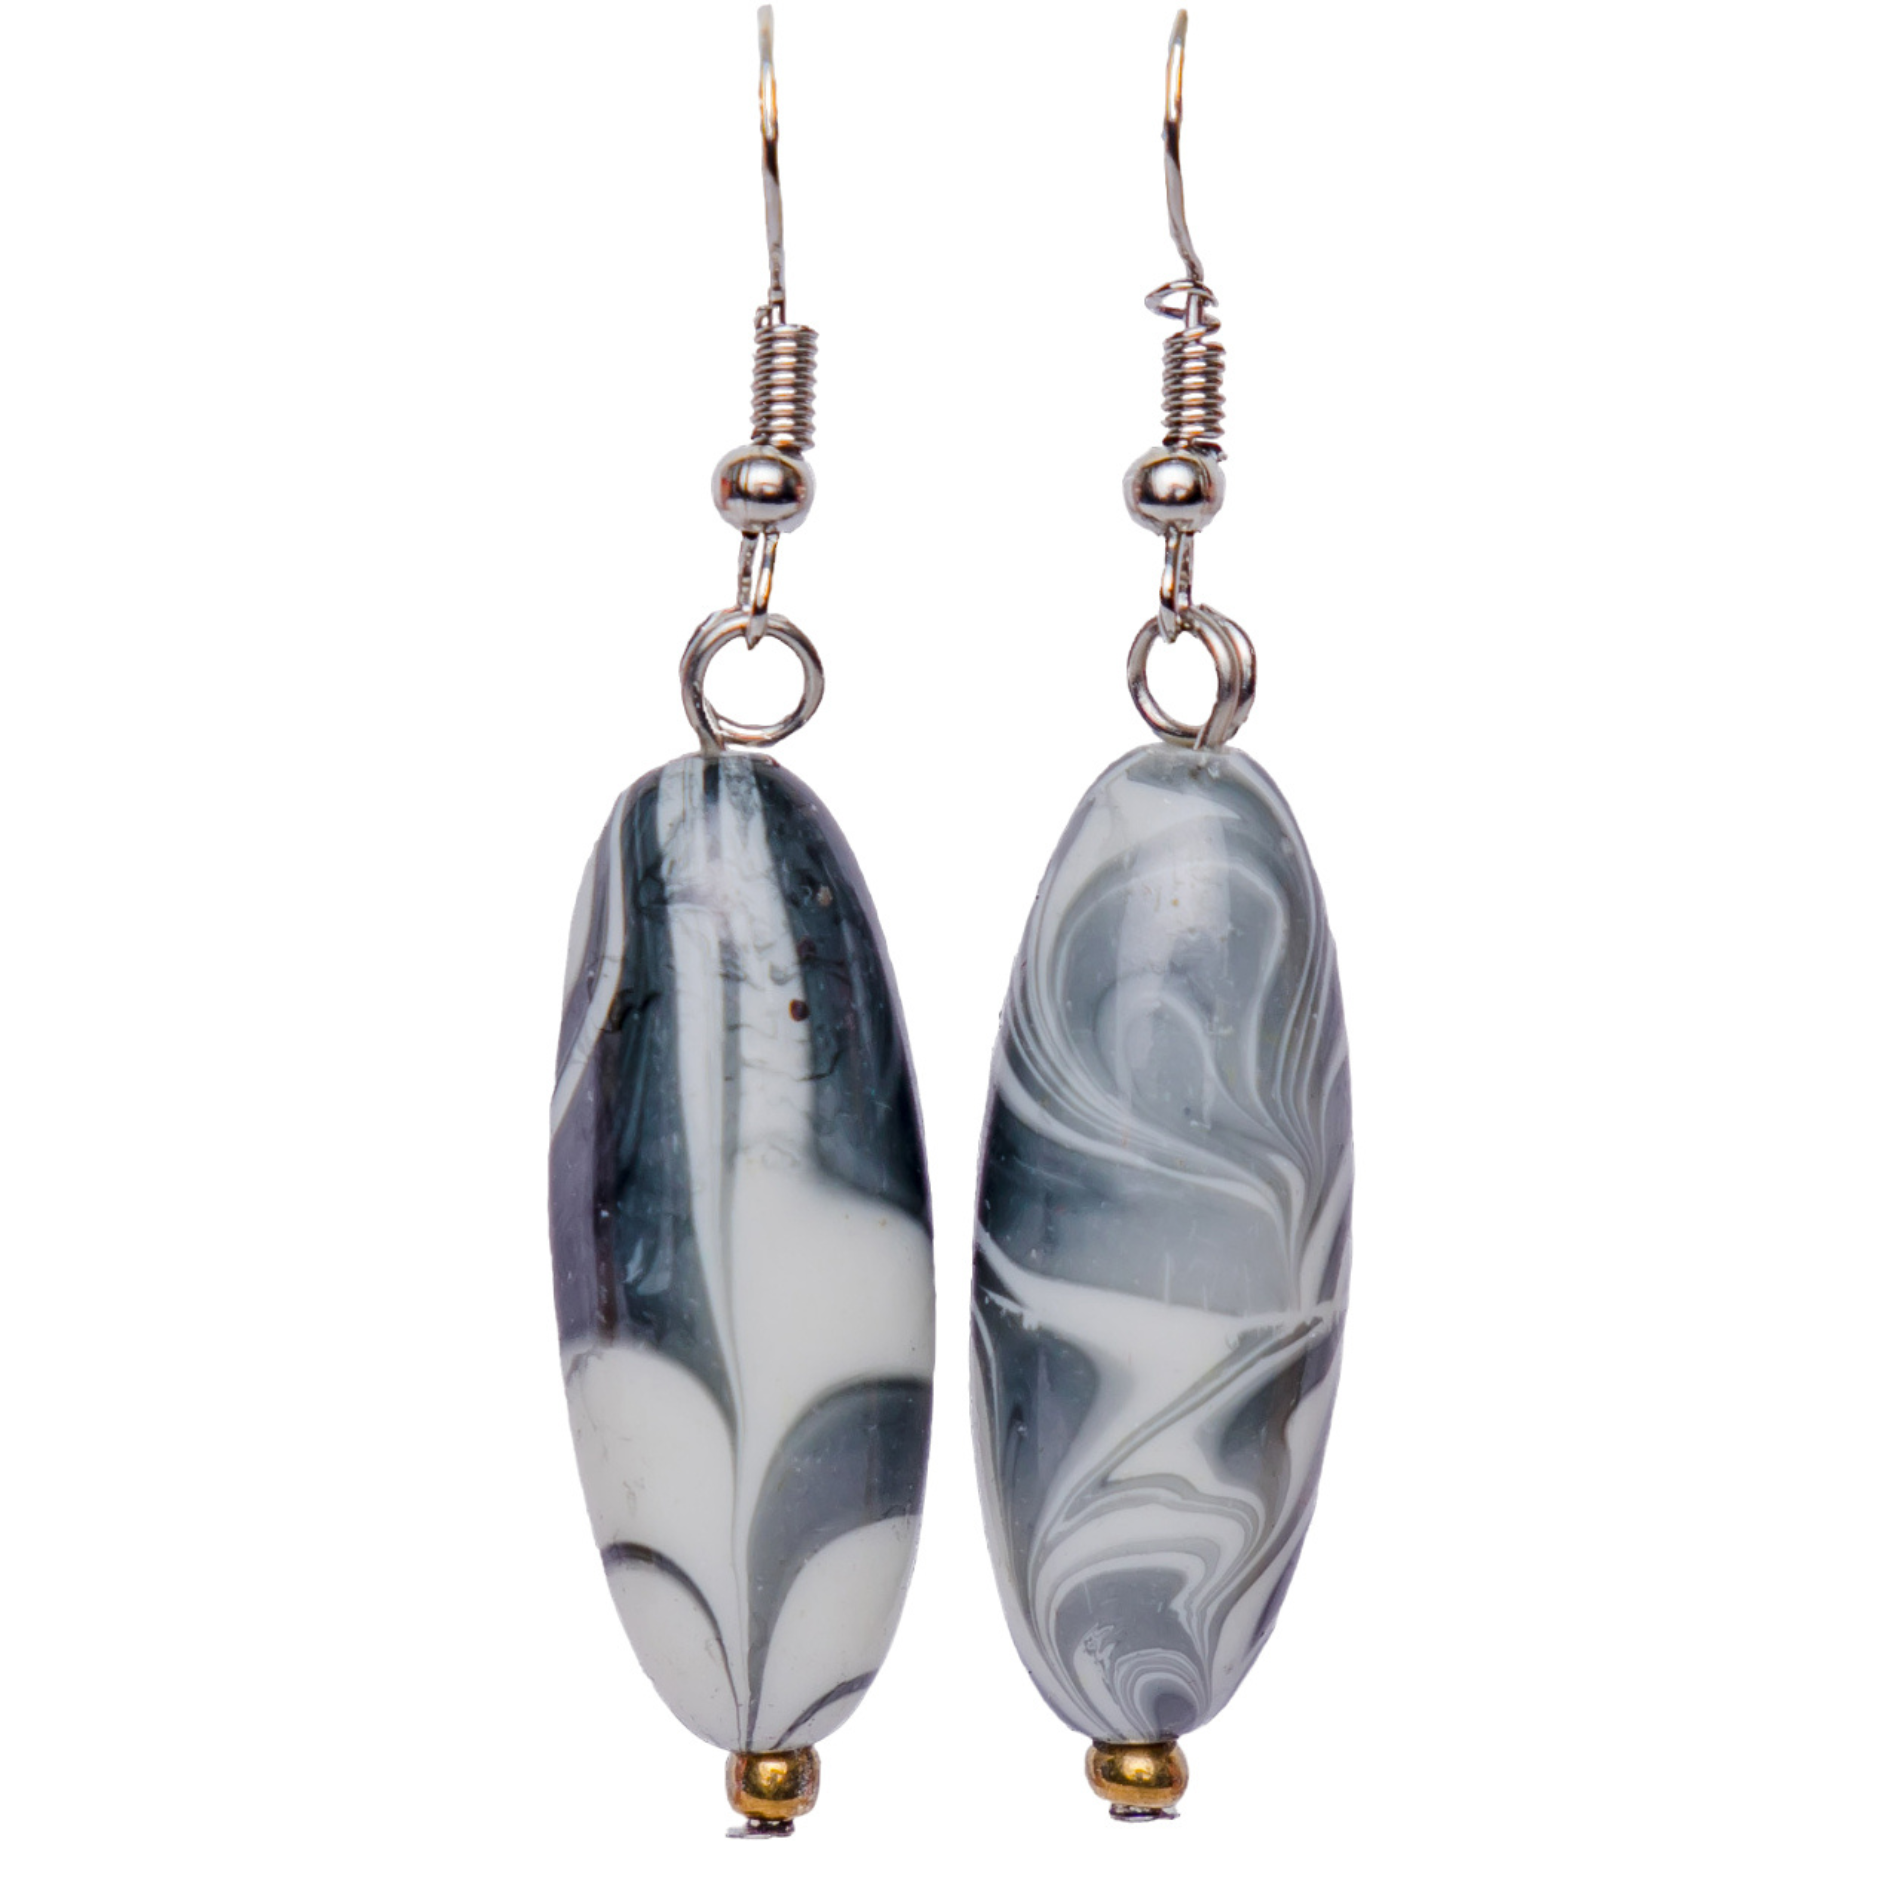 Mismatched gray earrings. Each earring has a unique print that complements the other print.